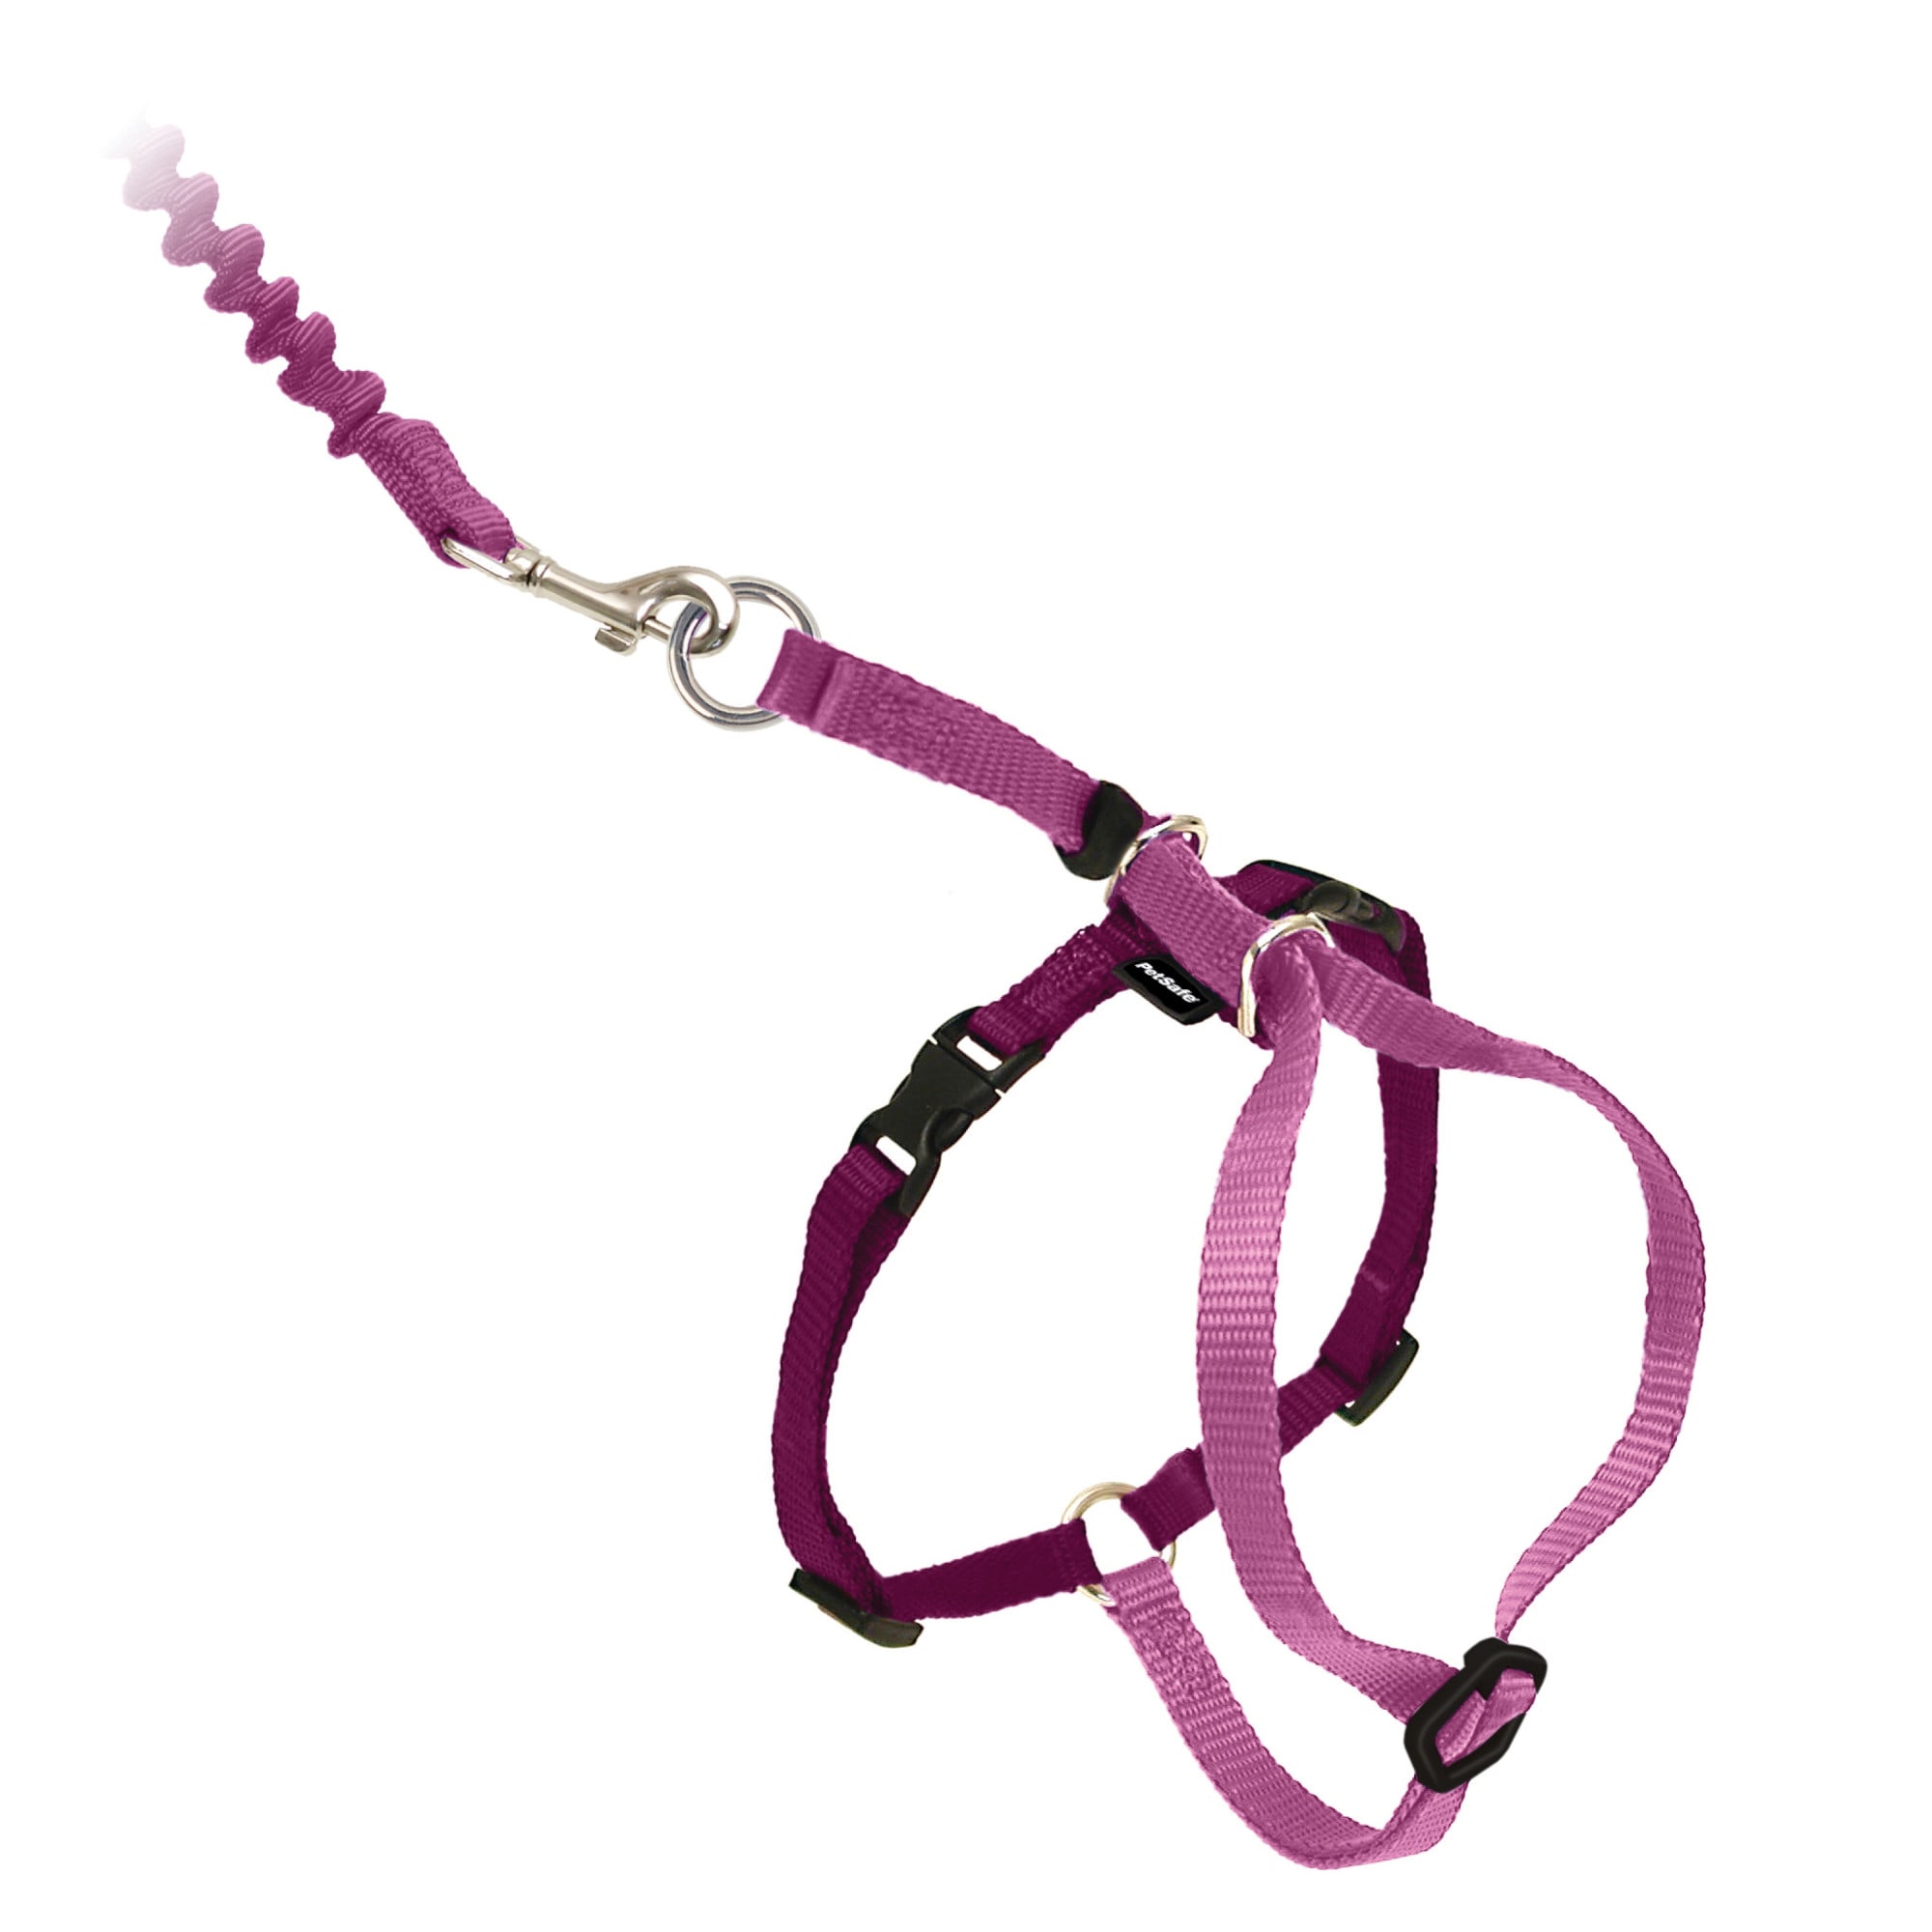 Photos - Collar / Harnesses PetSafe Gentle Leader Come with Me Kitty Harness & Bungee Leash in 